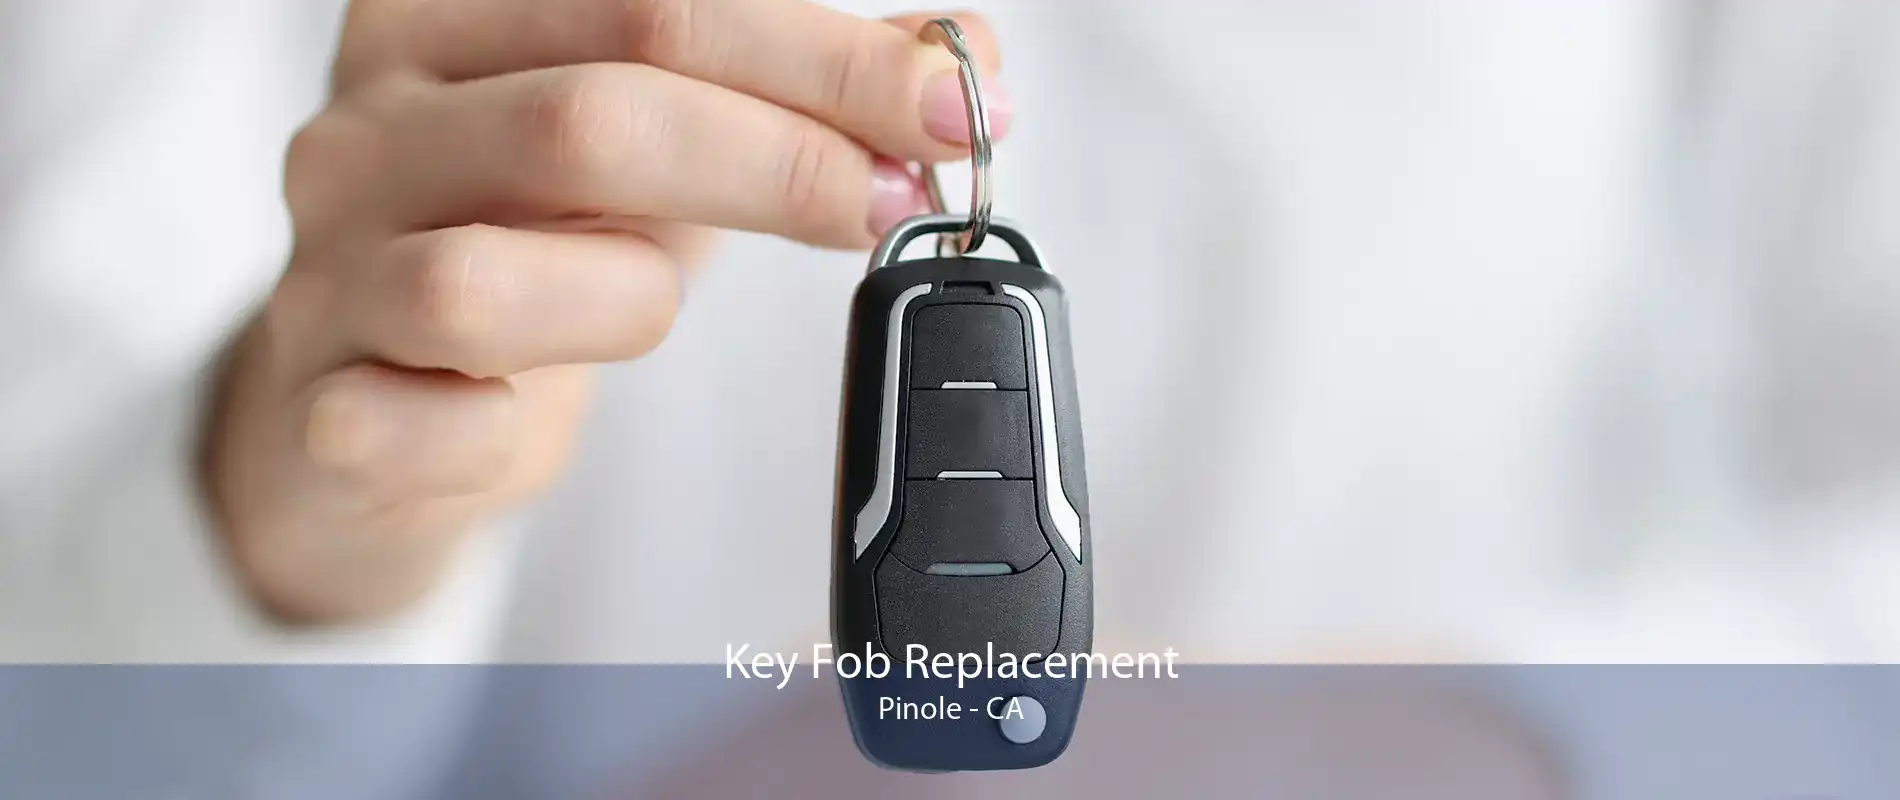 Key Fob Replacement Pinole - CA